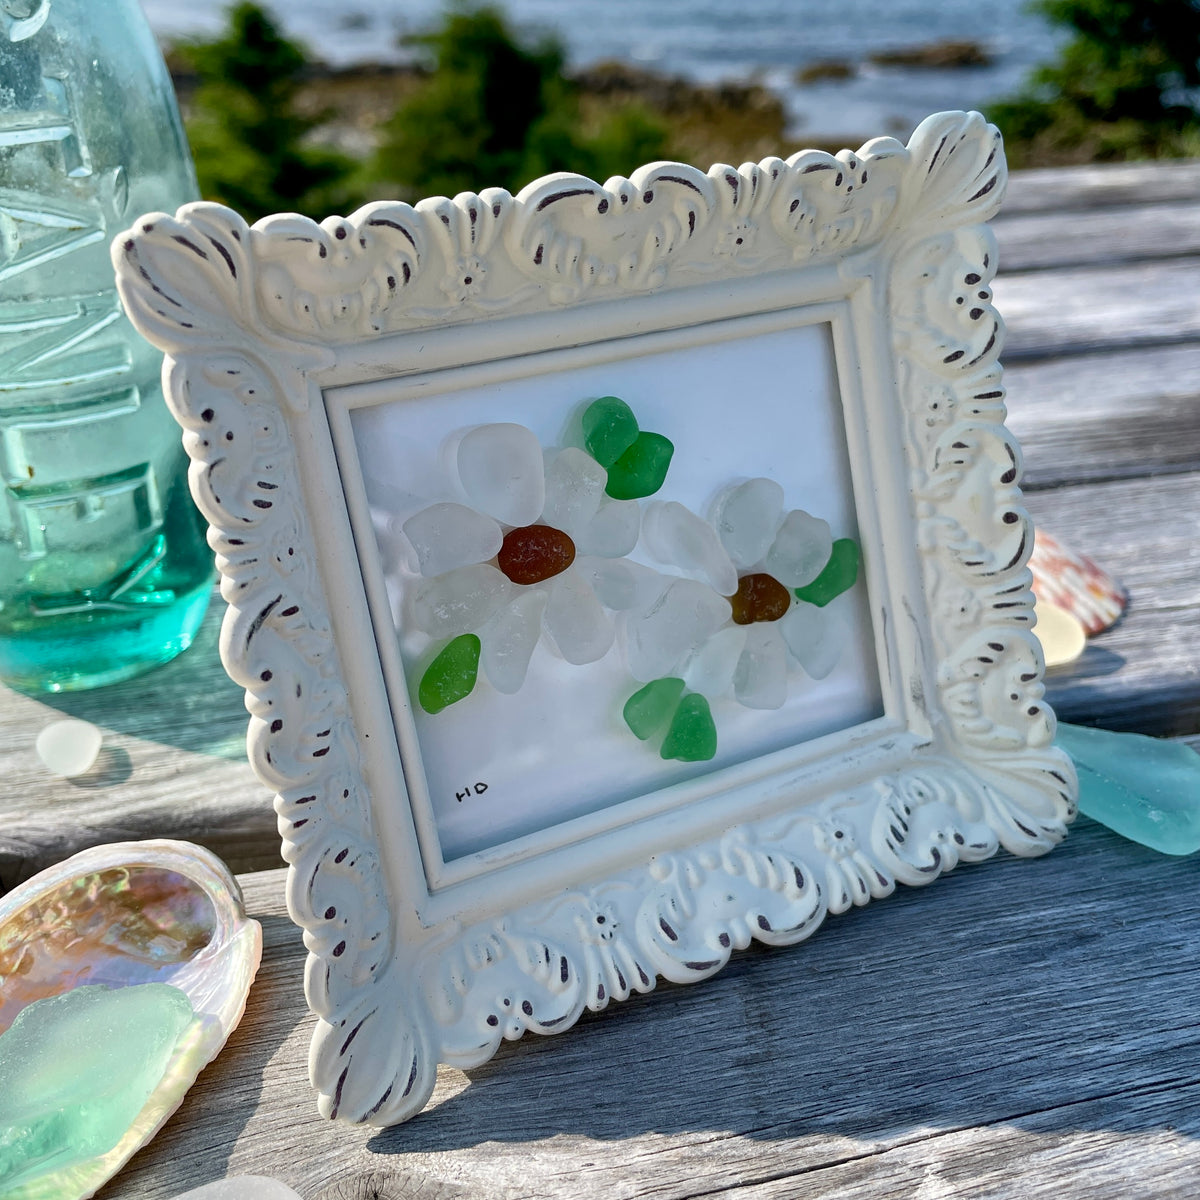 NS Beads - Sea Glass – Seaside Gallery and Goods